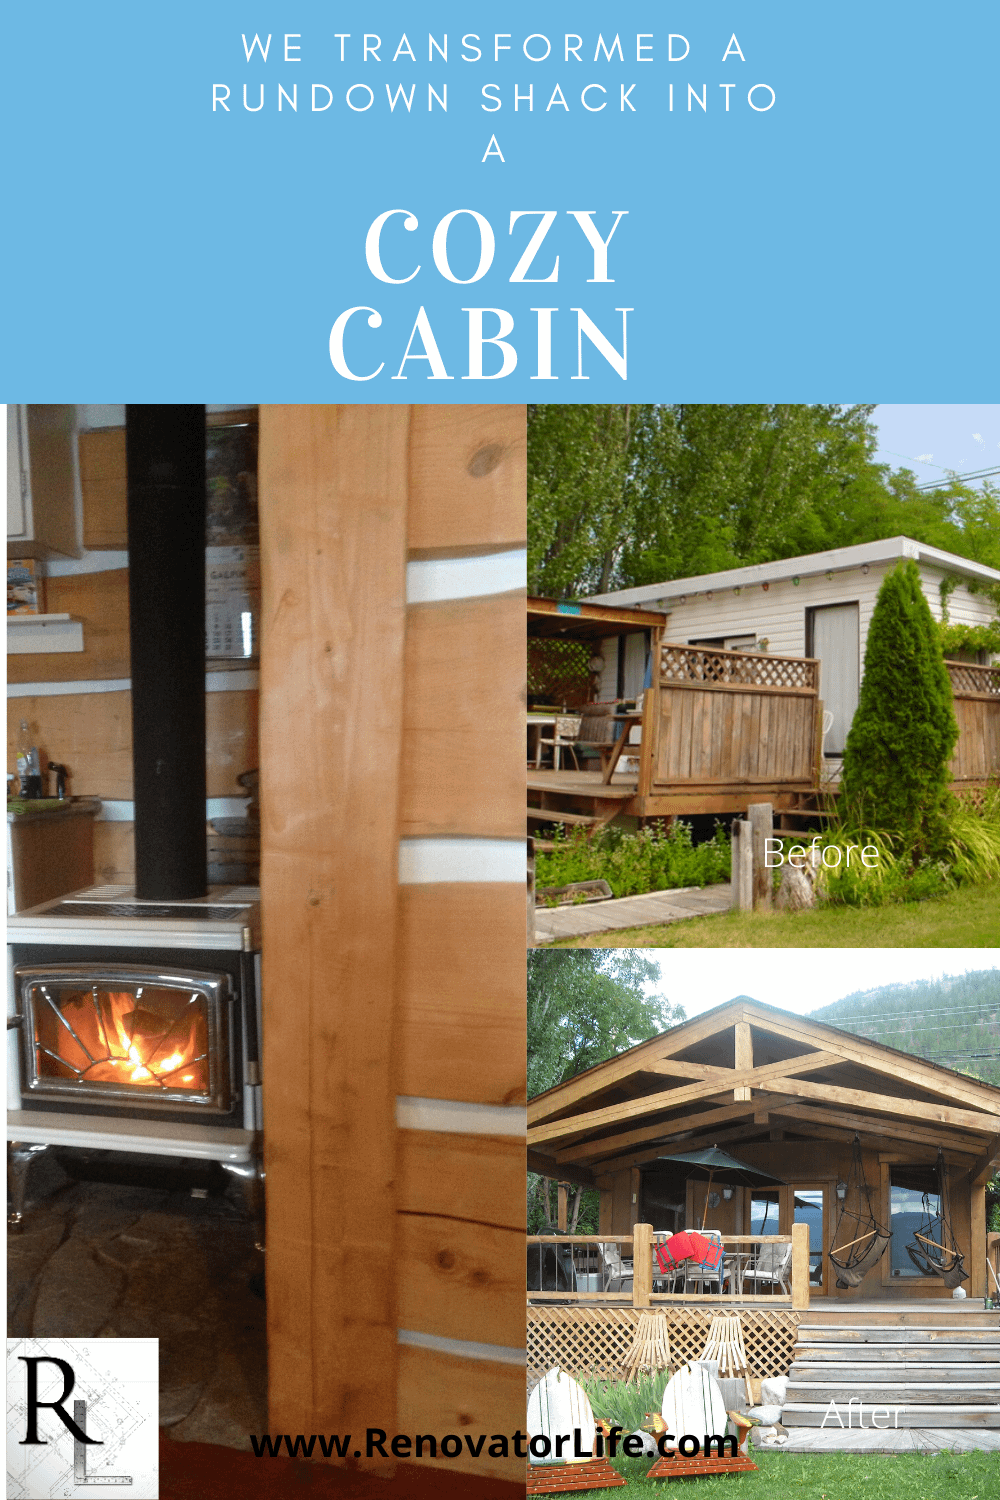 We transformed a shack into a cute cabin